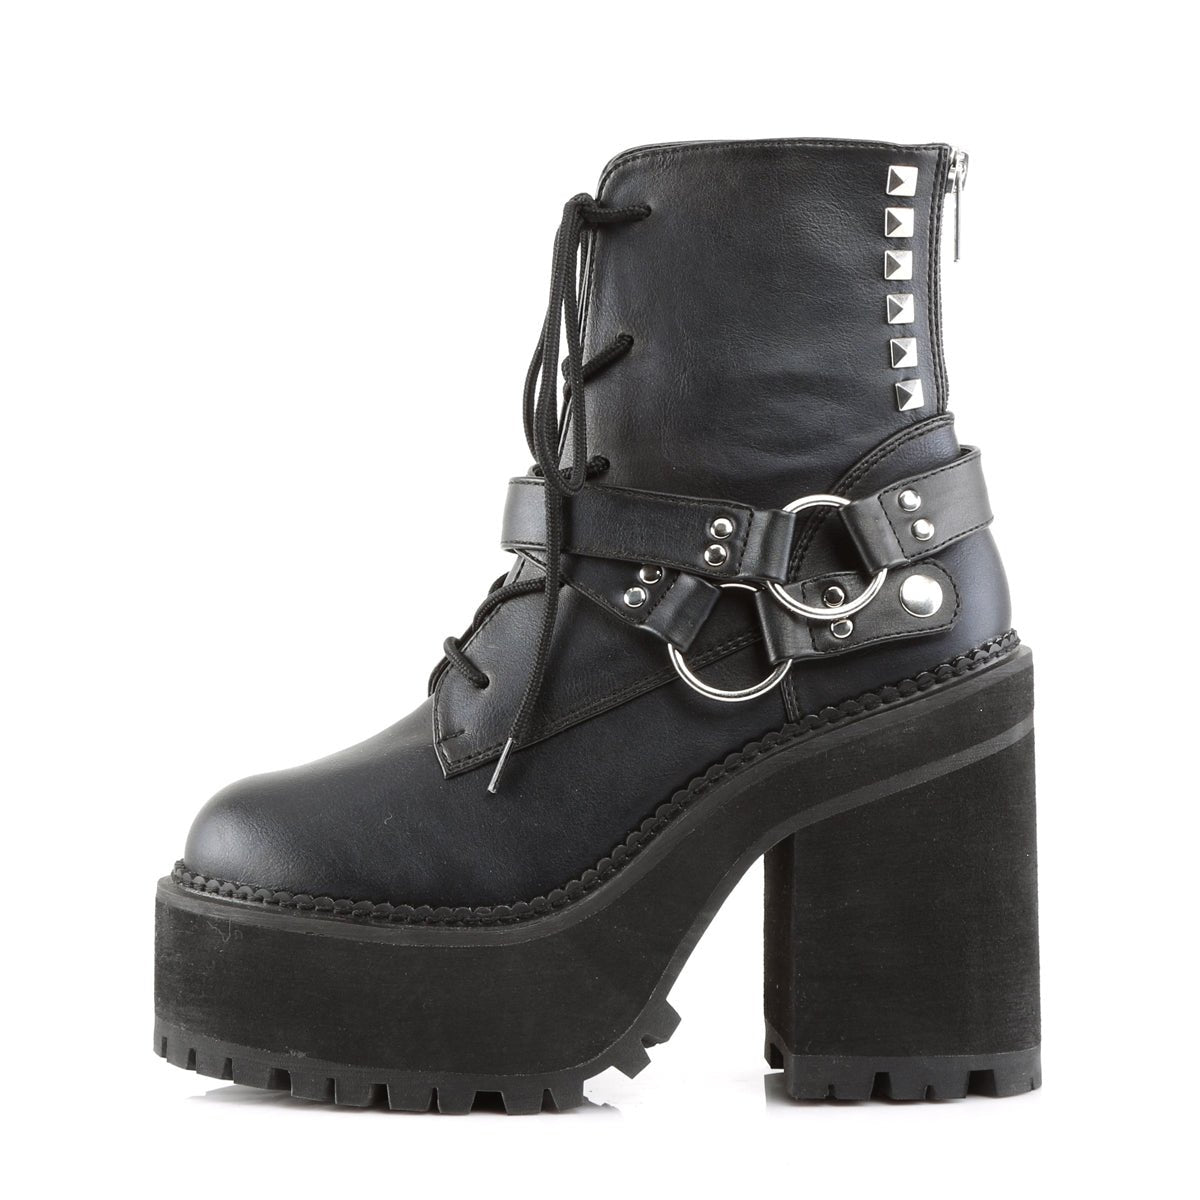 Too Fast | Demonia Assault 101 | Black Vegan Leather Women's Ankle Boots